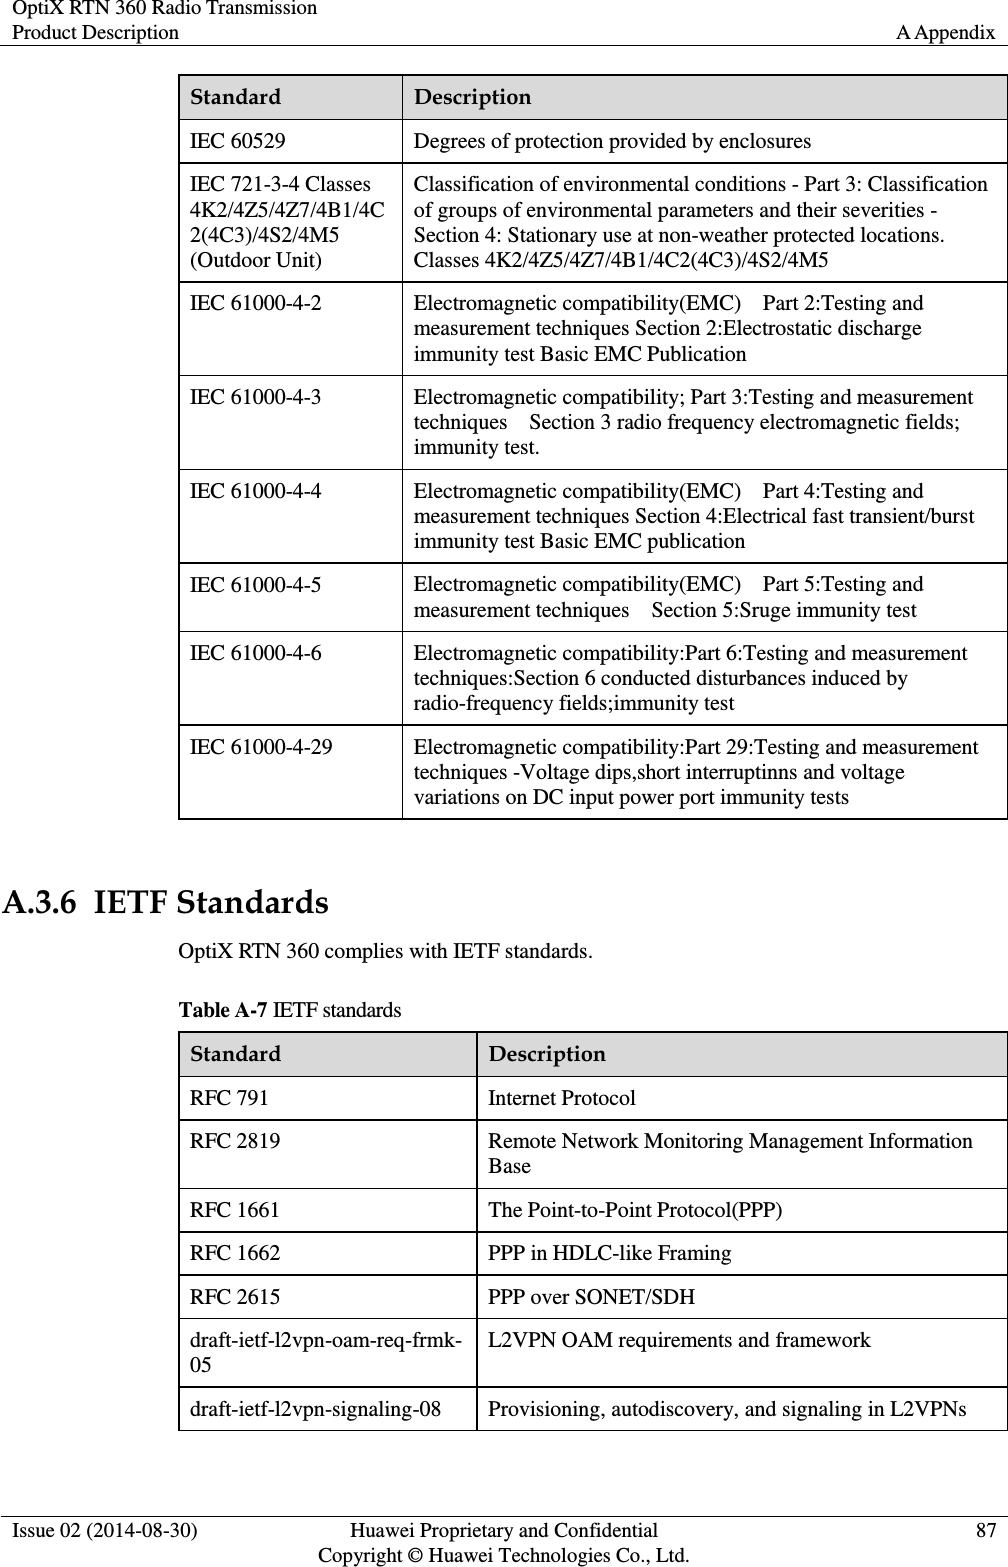 OptiX RTN 360 Radio Transmission Product Description A Appendix  Issue 02 (2014-08-30) Huawei Proprietary and Confidential                                     Copyright © Huawei Technologies Co., Ltd. 87  Standard Description IEC 60529 Degrees of protection provided by enclosures IEC 721-3-4 Classes 4K2/4Z5/4Z7/4B1/4C2(4C3)/4S2/4M5 (Outdoor Unit) Classification of environmental conditions - Part 3: Classification of groups of environmental parameters and their severities - Section 4: Stationary use at non-weather protected locations. Classes 4K2/4Z5/4Z7/4B1/4C2(4C3)/4S2/4M5 IEC 61000-4-2 Electromagnetic compatibility(EMC)    Part 2:Testing and measurement techniques Section 2:Electrostatic discharge immunity test Basic EMC Publication IEC 61000-4-3 Electromagnetic compatibility; Part 3:Testing and measurement techniques    Section 3 radio frequency electromagnetic fields; immunity test. IEC 61000-4-4 Electromagnetic compatibility(EMC)    Part 4:Testing and measurement techniques Section 4:Electrical fast transient/burst immunity test Basic EMC publication IEC 61000-4-5 Electromagnetic compatibility(EMC)    Part 5:Testing and measurement techniques    Section 5:Sruge immunity test IEC 61000-4-6 Electromagnetic compatibility:Part 6:Testing and measurement techniques:Section 6 conducted disturbances induced by radio-frequency fields;immunity test IEC 61000-4-29 Electromagnetic compatibility:Part 29:Testing and measurement techniques -Voltage dips,short interruptinns and voltage   variations on DC input power port immunity tests  A.3.6  IETF Standards OptiX RTN 360 complies with IETF standards. Table A-7 IETF standards Standard Description RFC 791 Internet Protocol RFC 2819 Remote Network Monitoring Management Information Base RFC 1661 The Point-to-Point Protocol(PPP) RFC 1662 PPP in HDLC-like Framing   RFC 2615 PPP over SONET/SDH draft-ietf-l2vpn-oam-req-frmk-05 L2VPN OAM requirements and framework draft-ietf-l2vpn-signaling-08 Provisioning, autodiscovery, and signaling in L2VPNs 